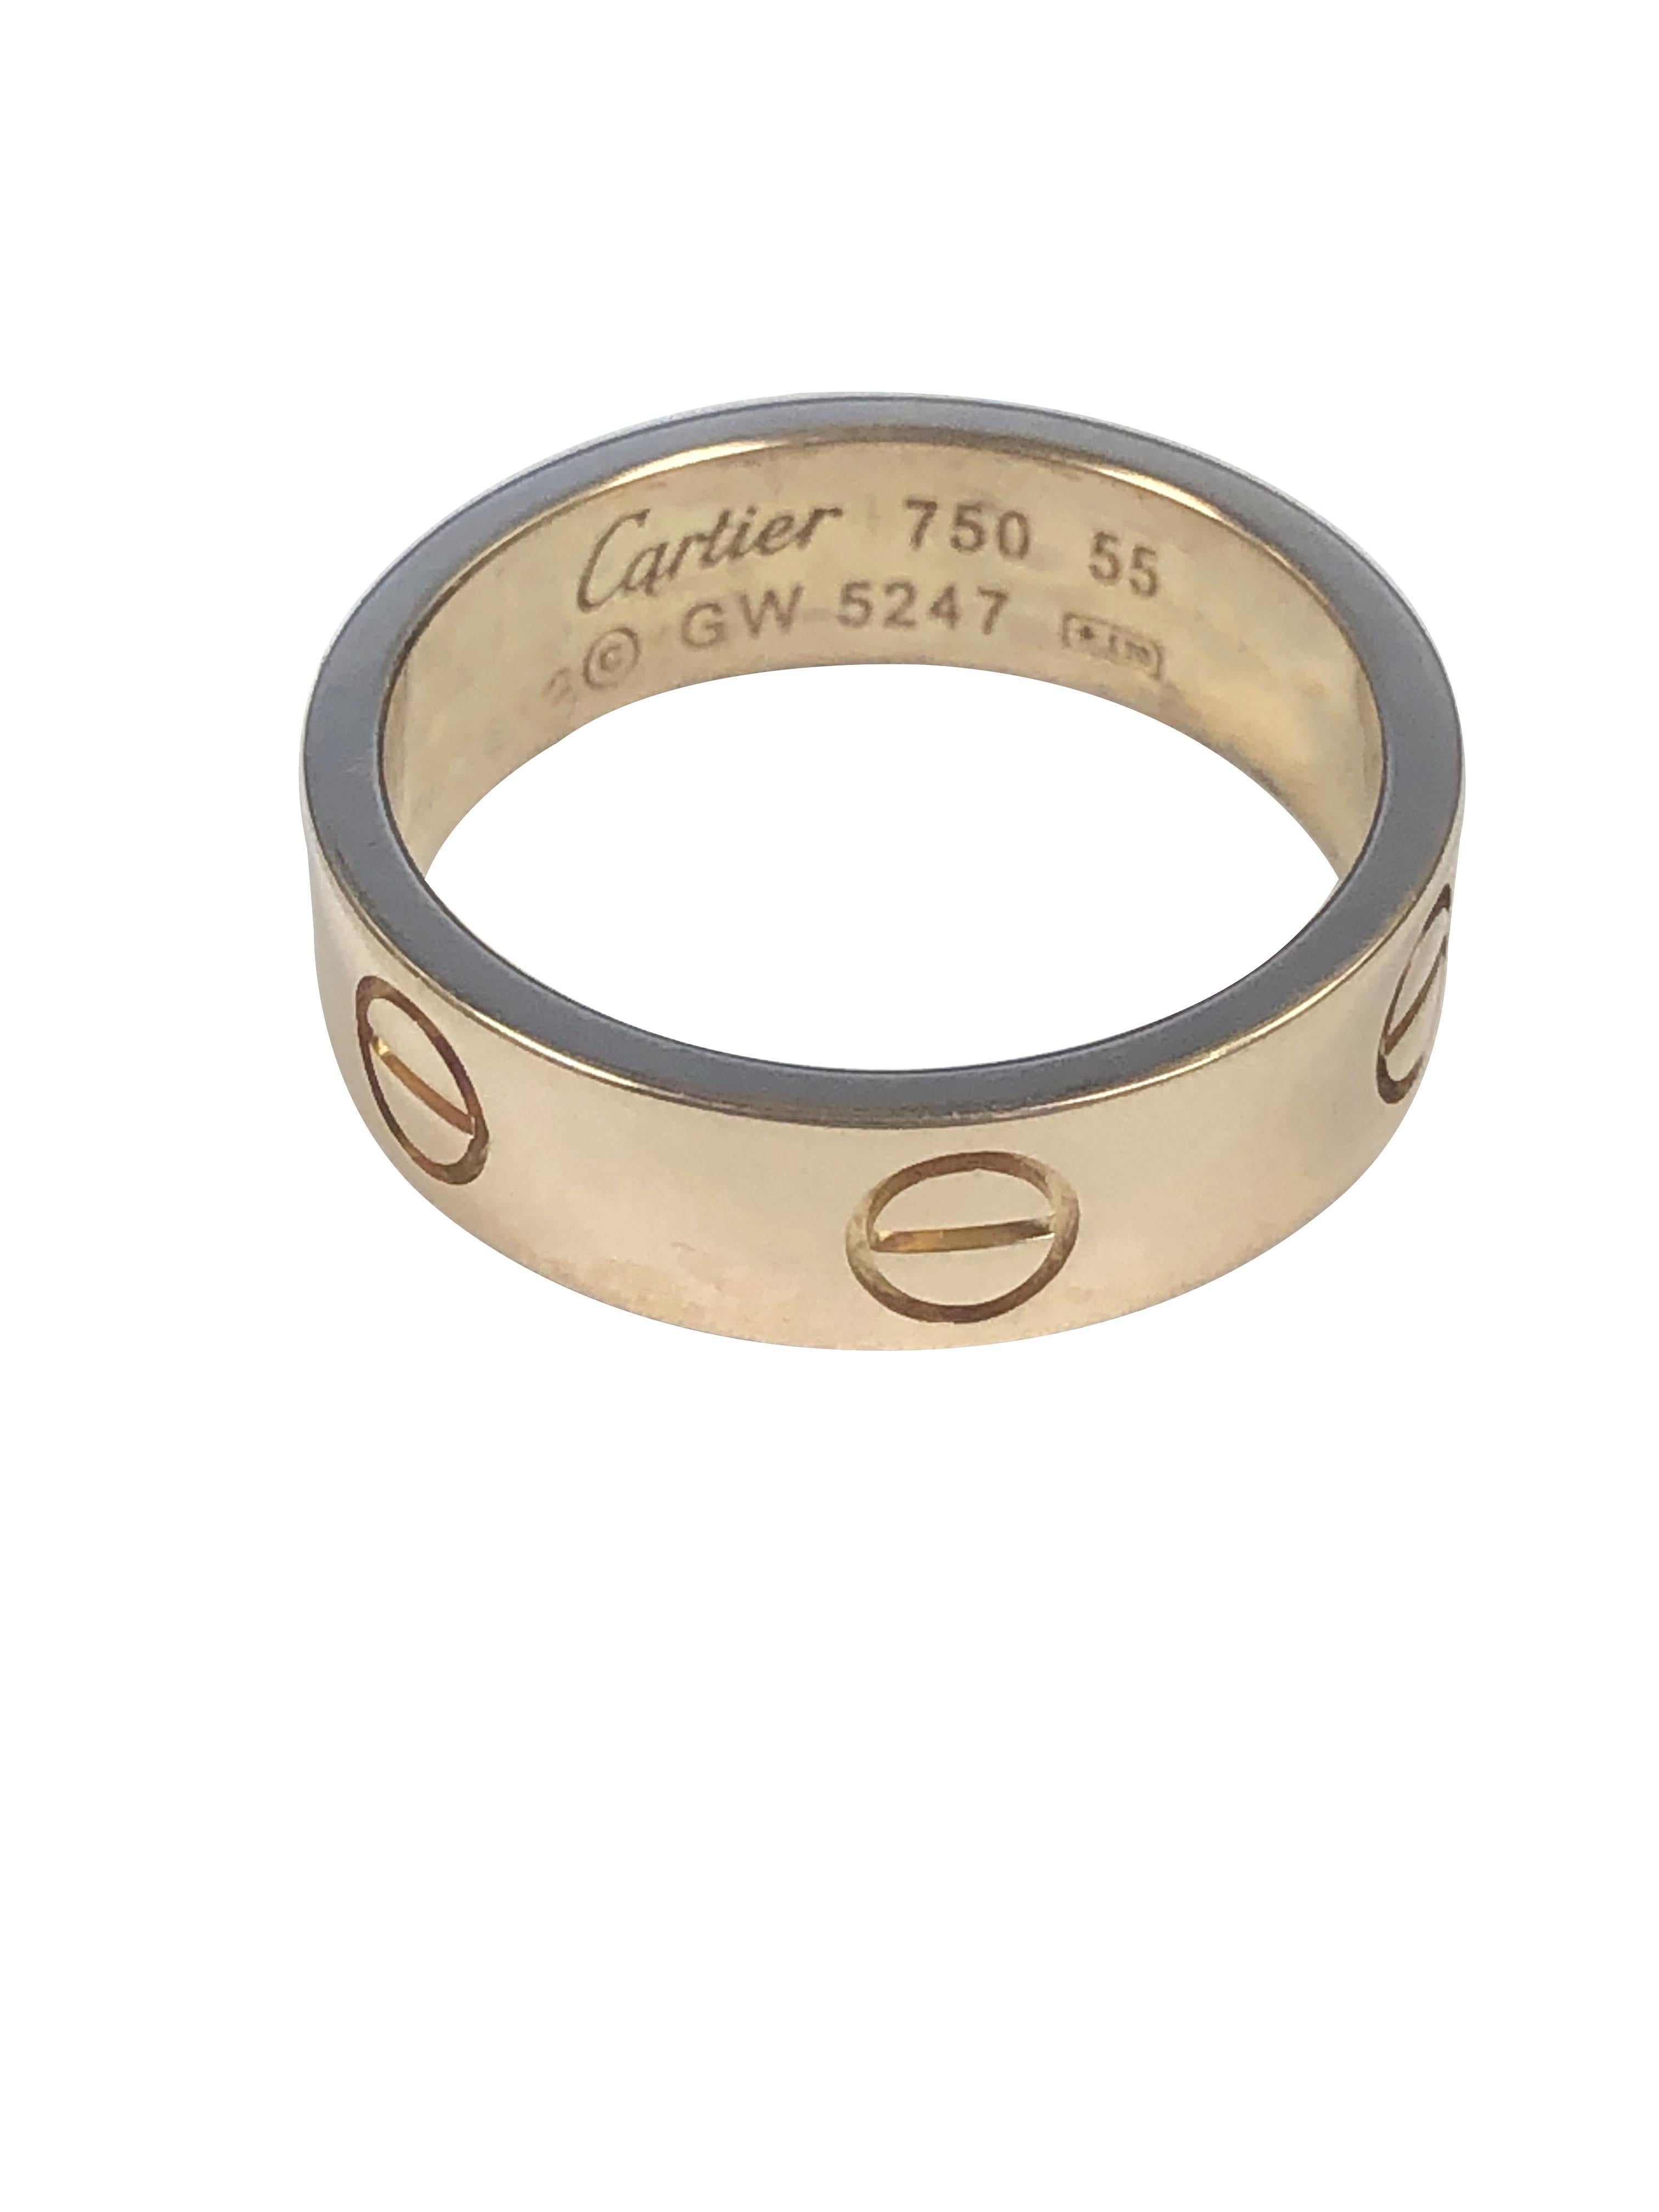 Circa 2010 Cartier 18K Yellow Gold Love Ring, Band Ring, measuring 5 M.M. wide and is a size 7 ( European size 55 )  Comes in the original presentation box.